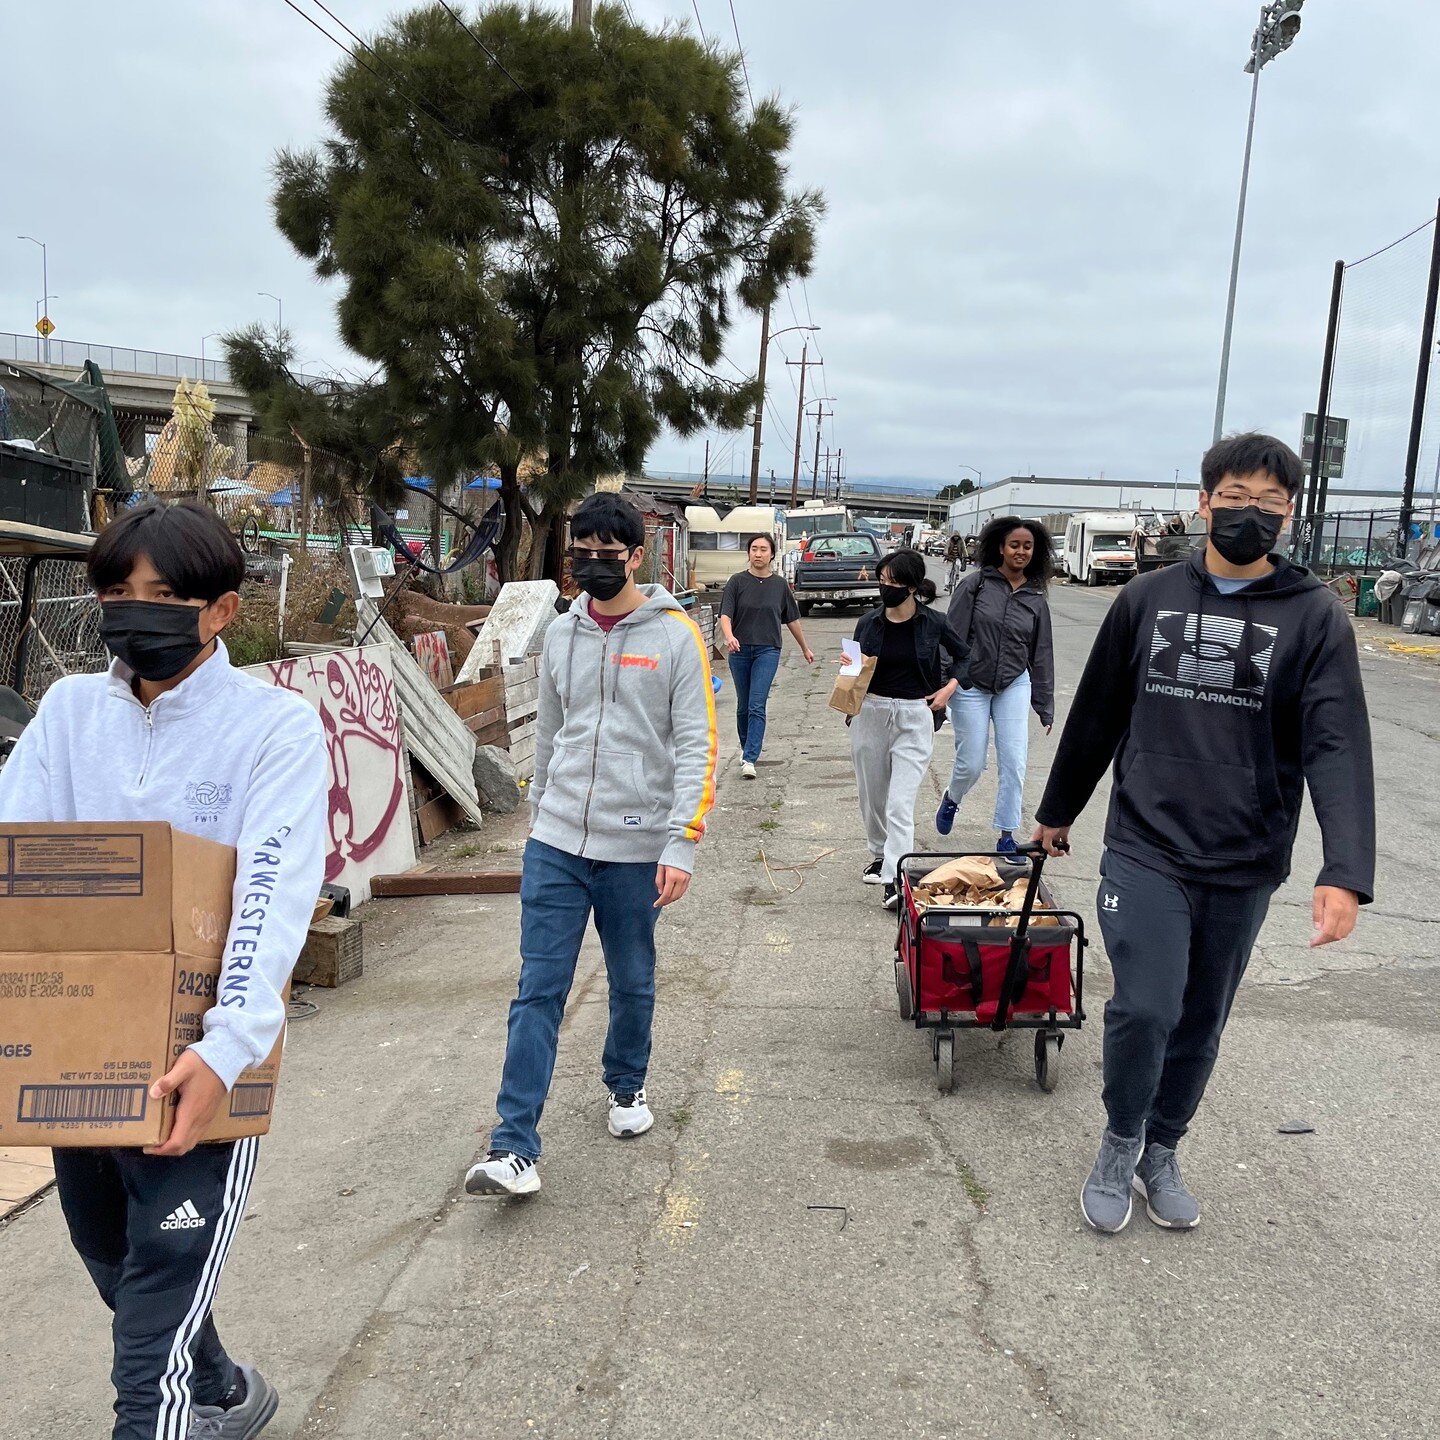 Last Saturday, Element visited the Unhoused Encampment to pass out water + snacks. We're thankful for the opportunity to meet and talk to some of the people there!